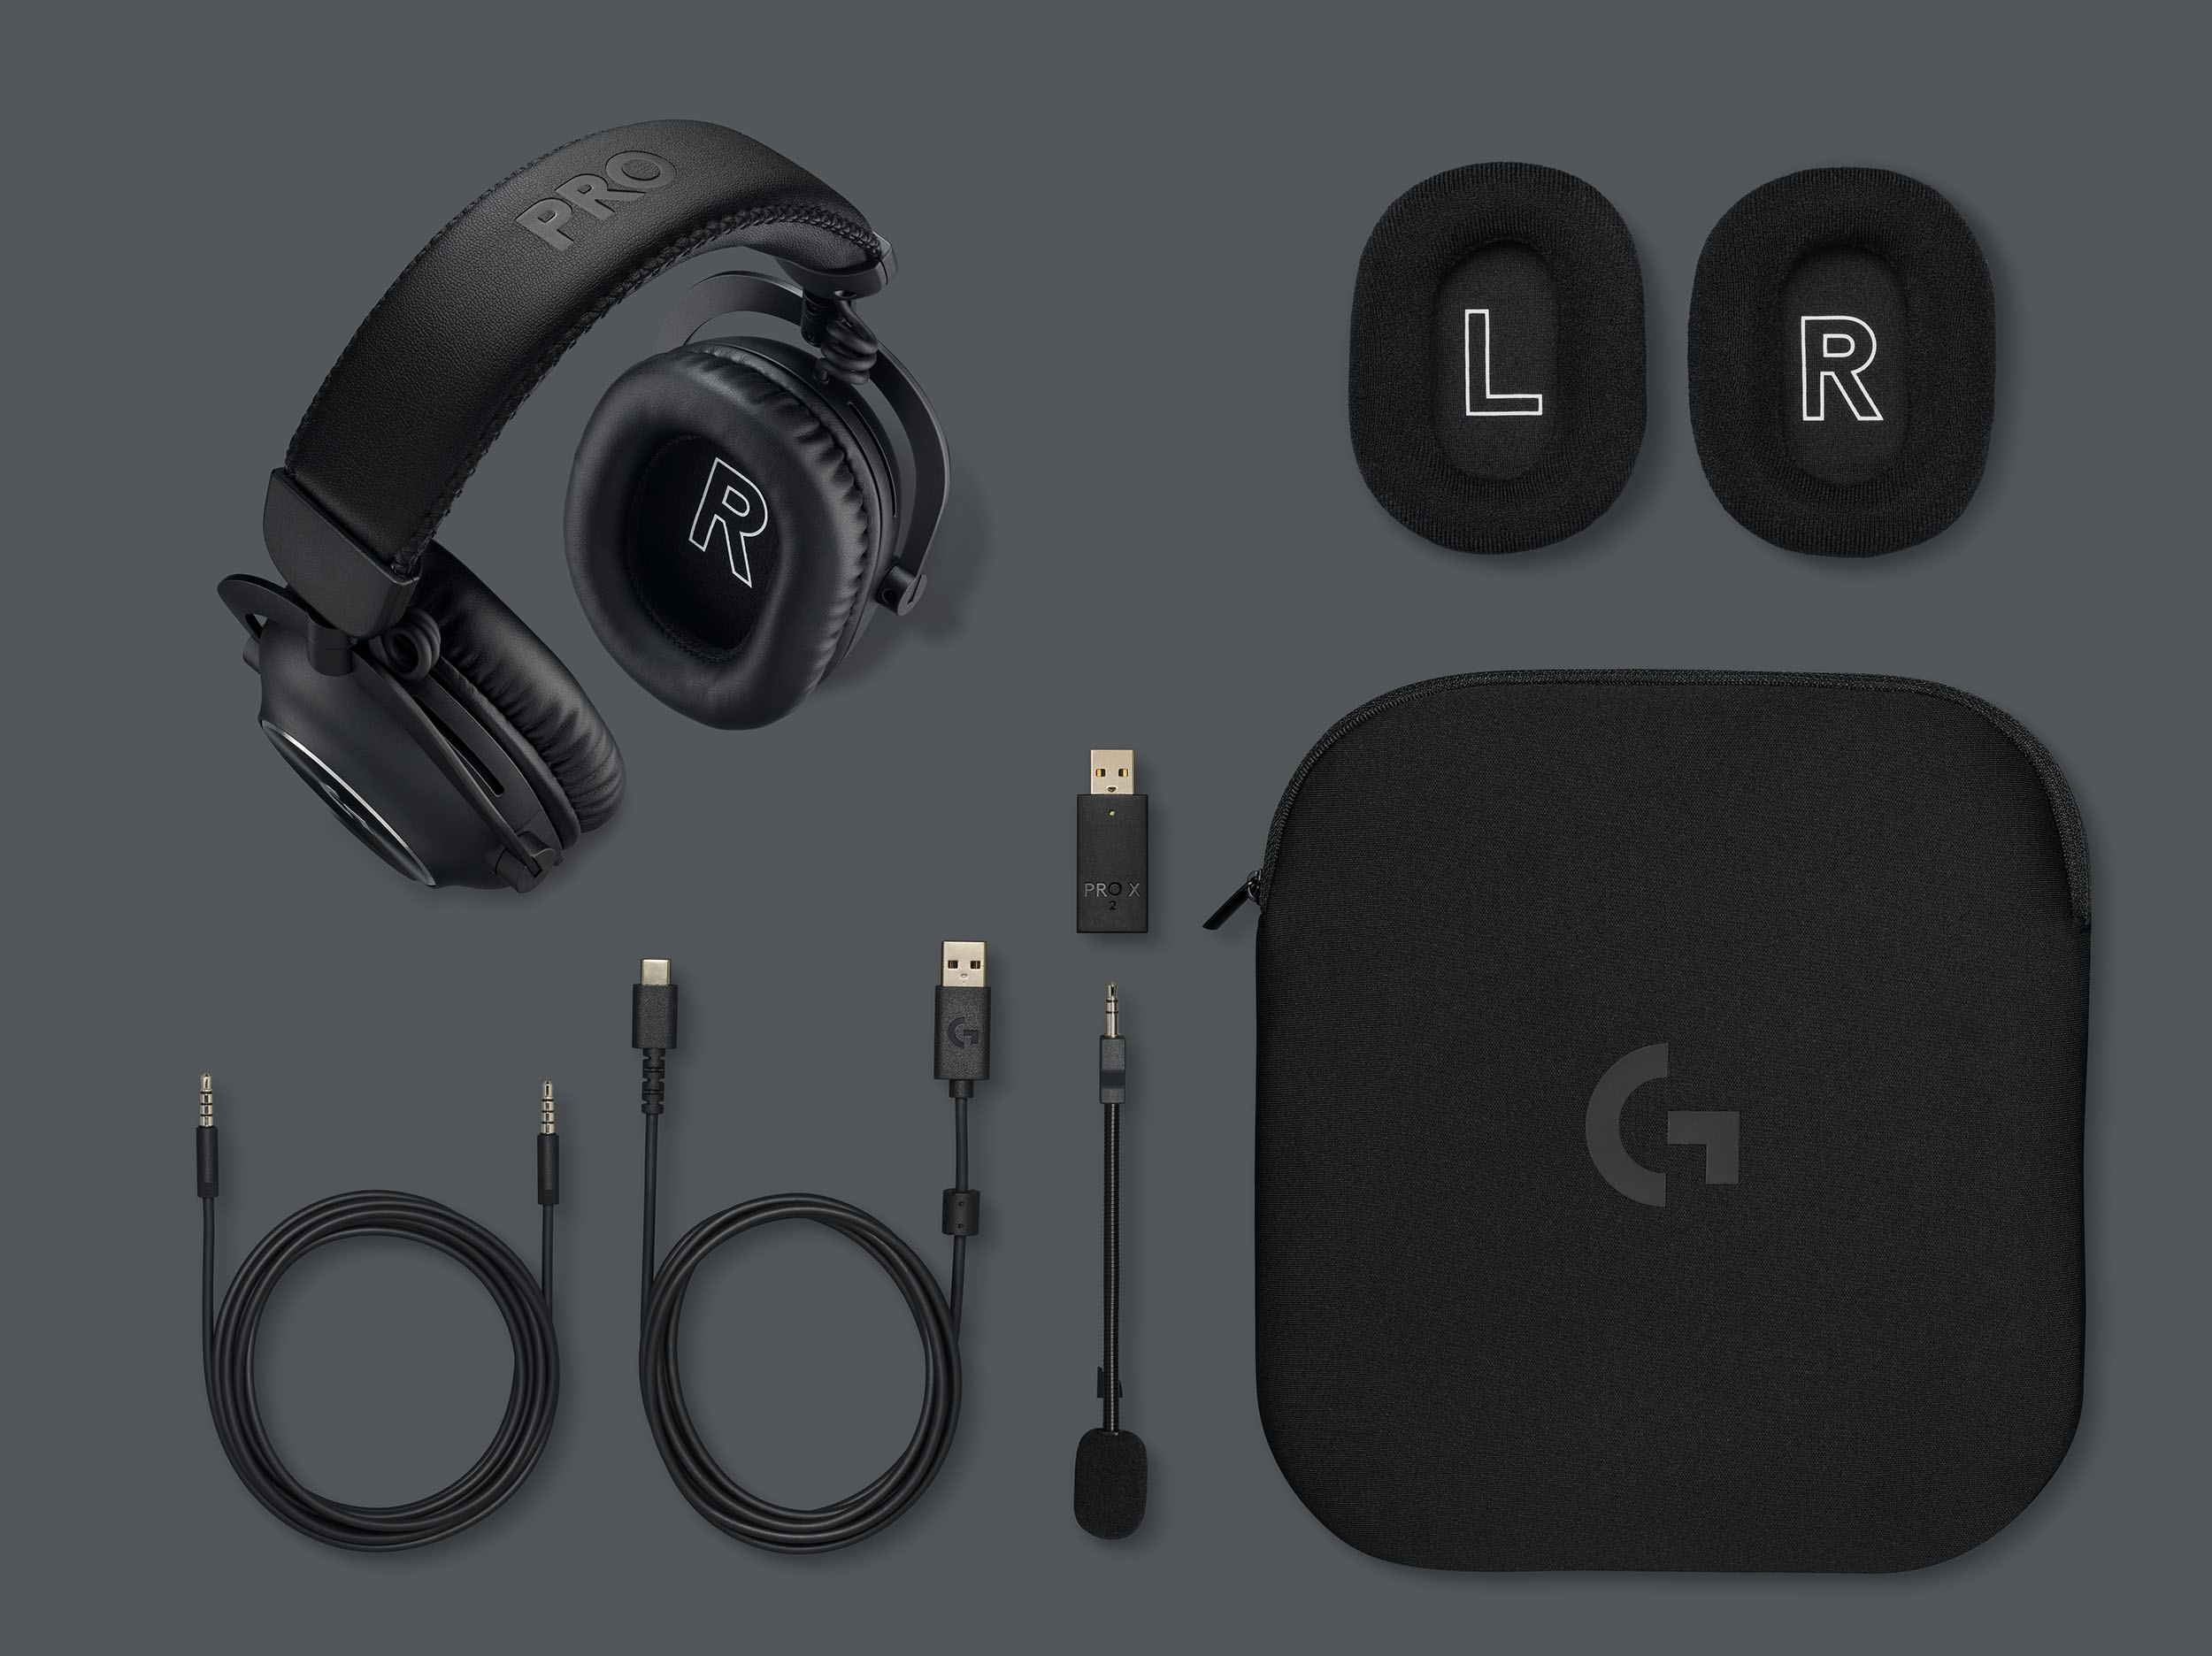 Logitech G Introduces the Newest Audio Innovation in Esports - The Logitech  G PRO X 2 LIGHTSPEED Gaming Headset with PRO-G GRAPHENE Audio Drivers